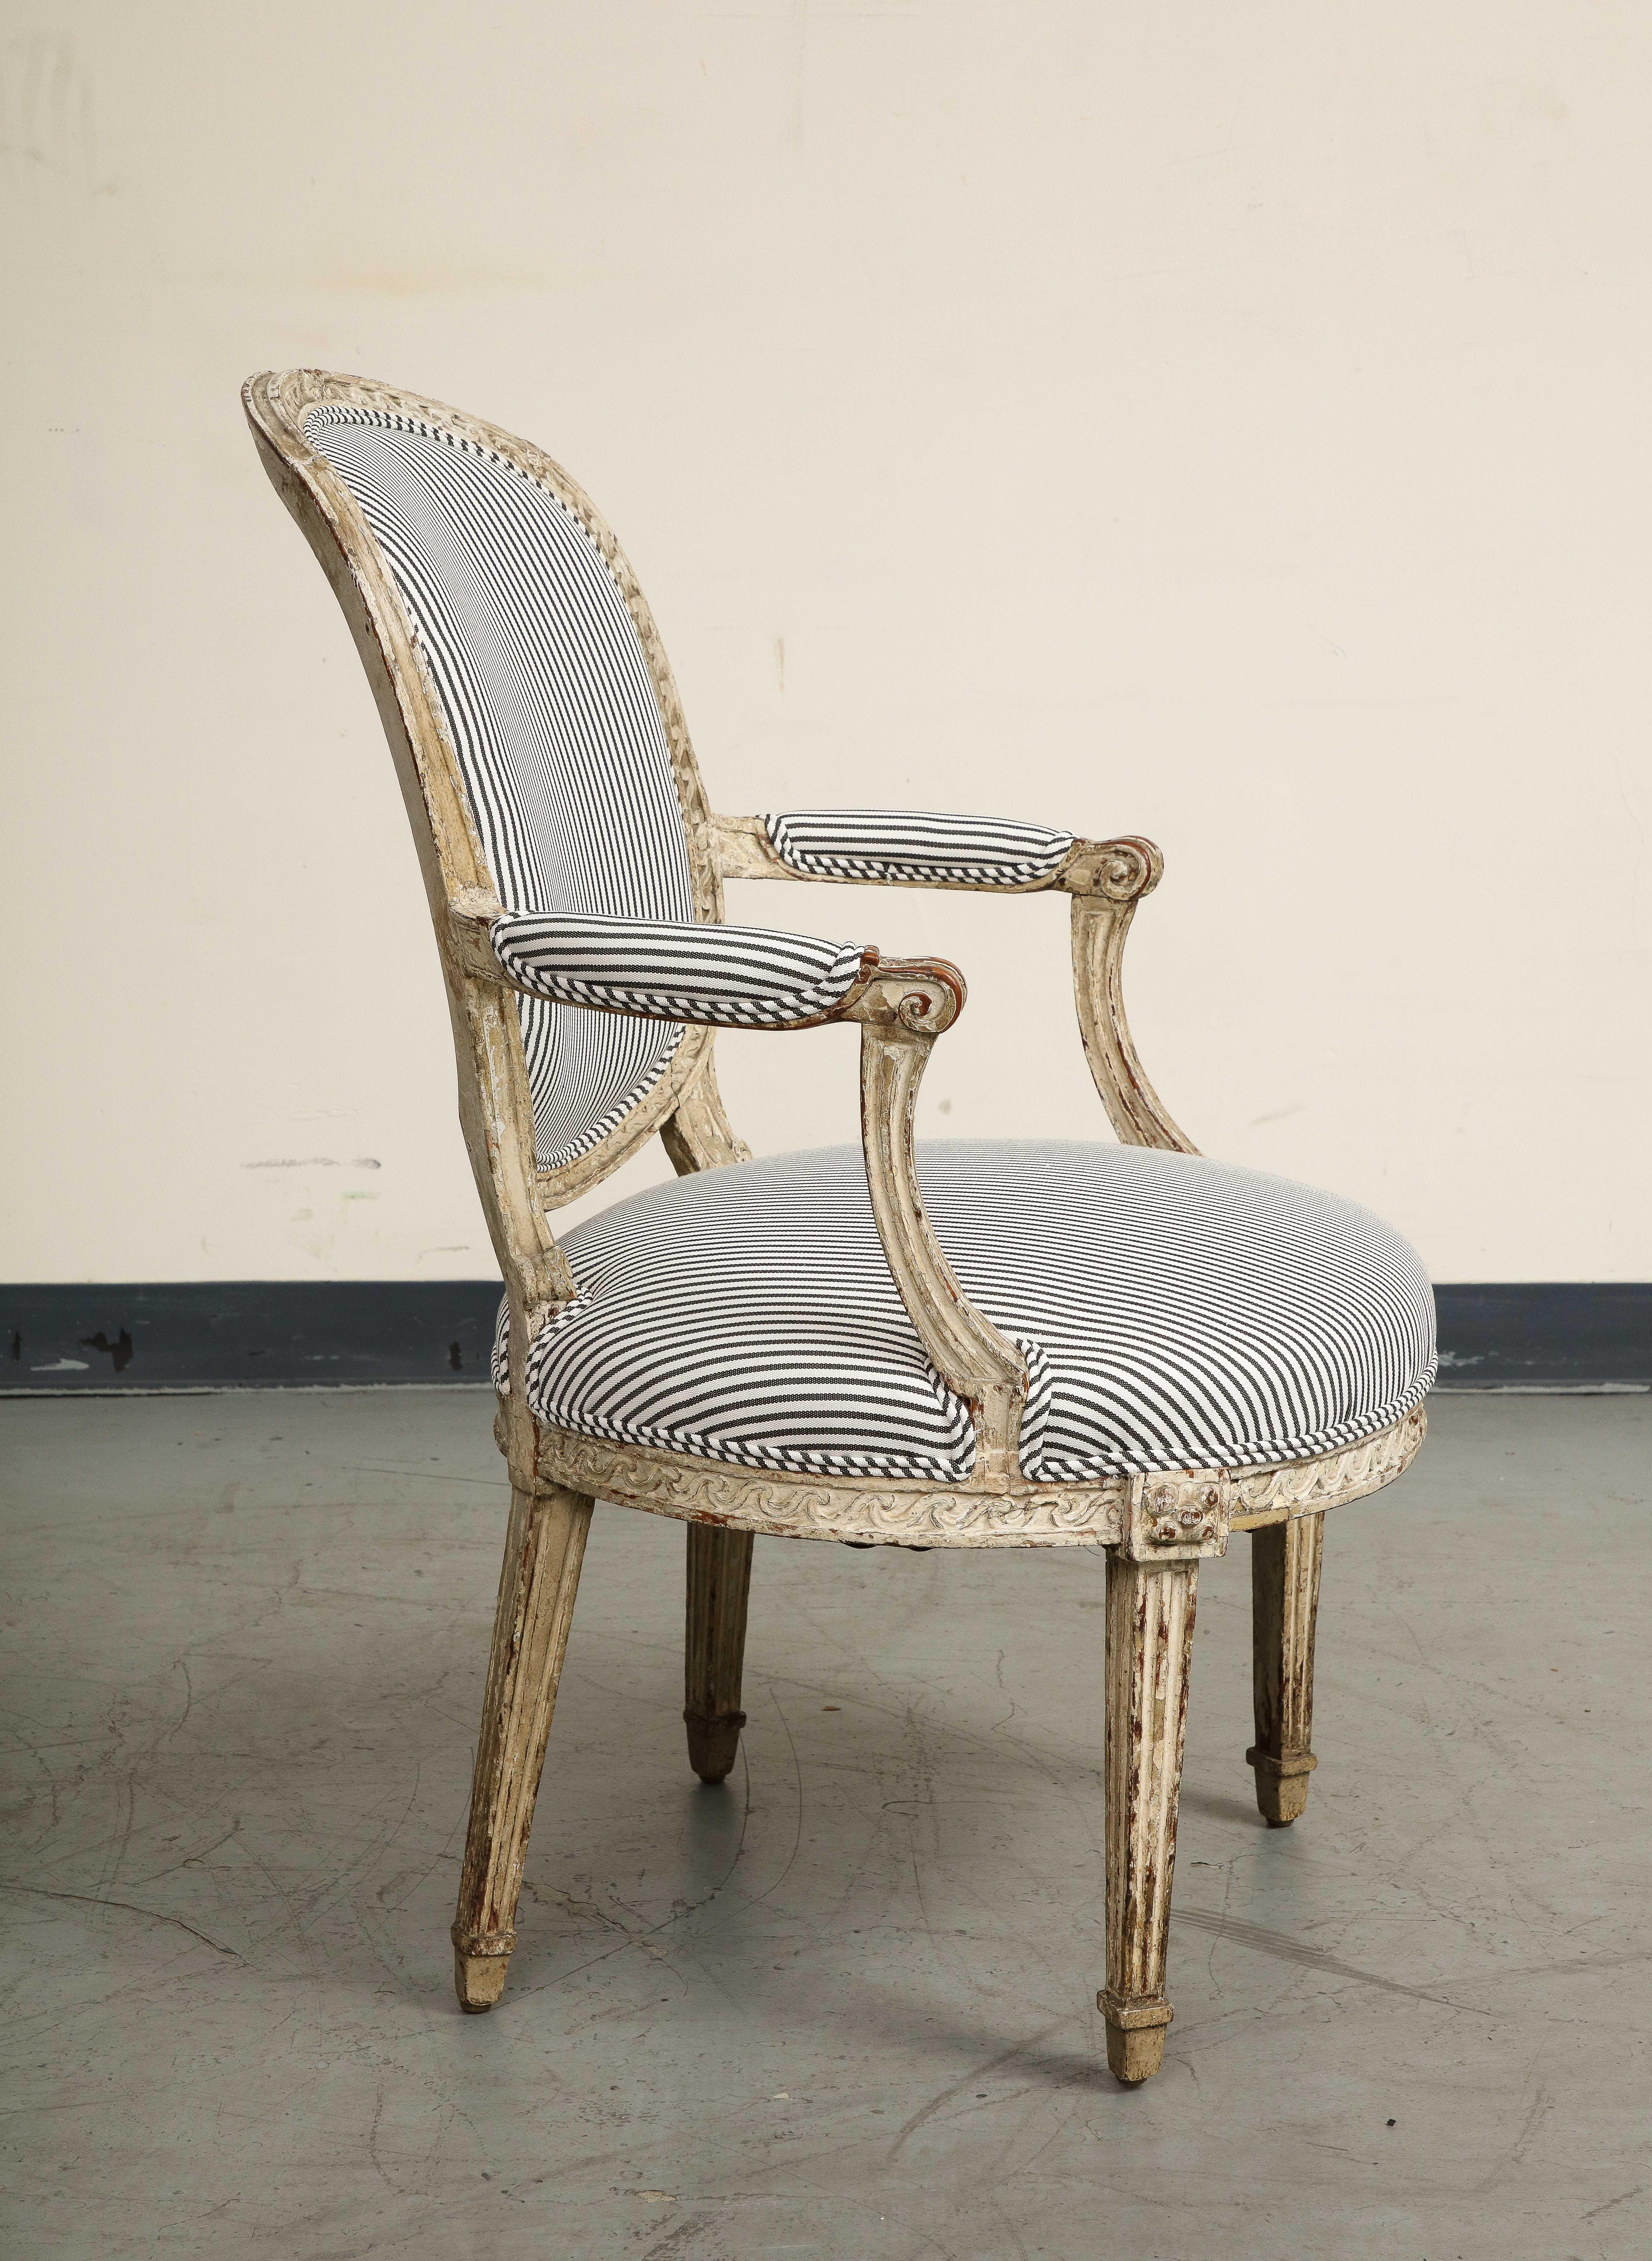 19th Century French Louis XVI Style Fauteuil Chair in Striped Linen Upholstery In Good Condition For Sale In Chicago, IL